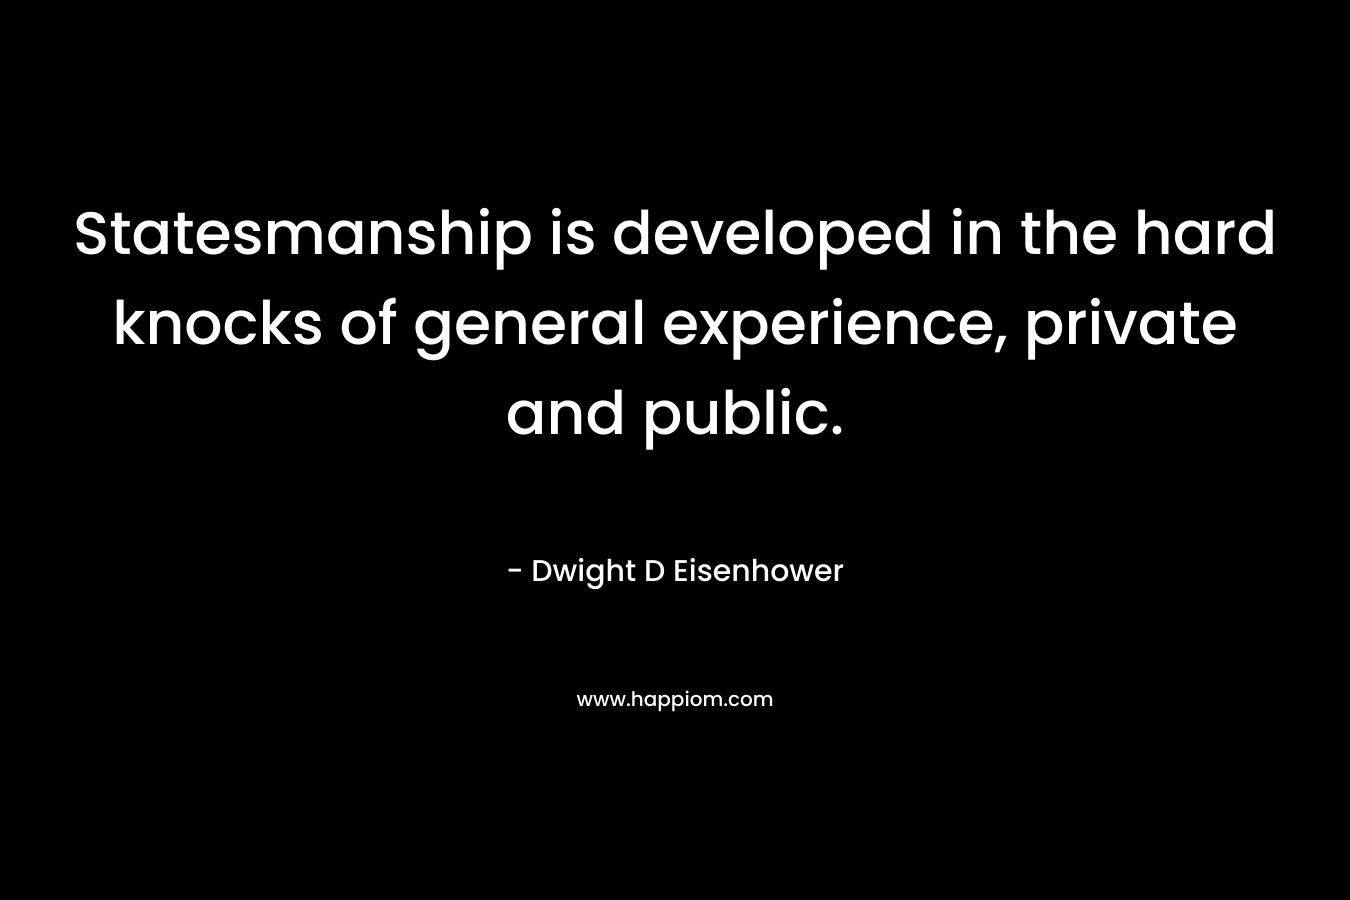 Statesmanship is developed in the hard knocks of general experience, private and public. – Dwight D Eisenhower